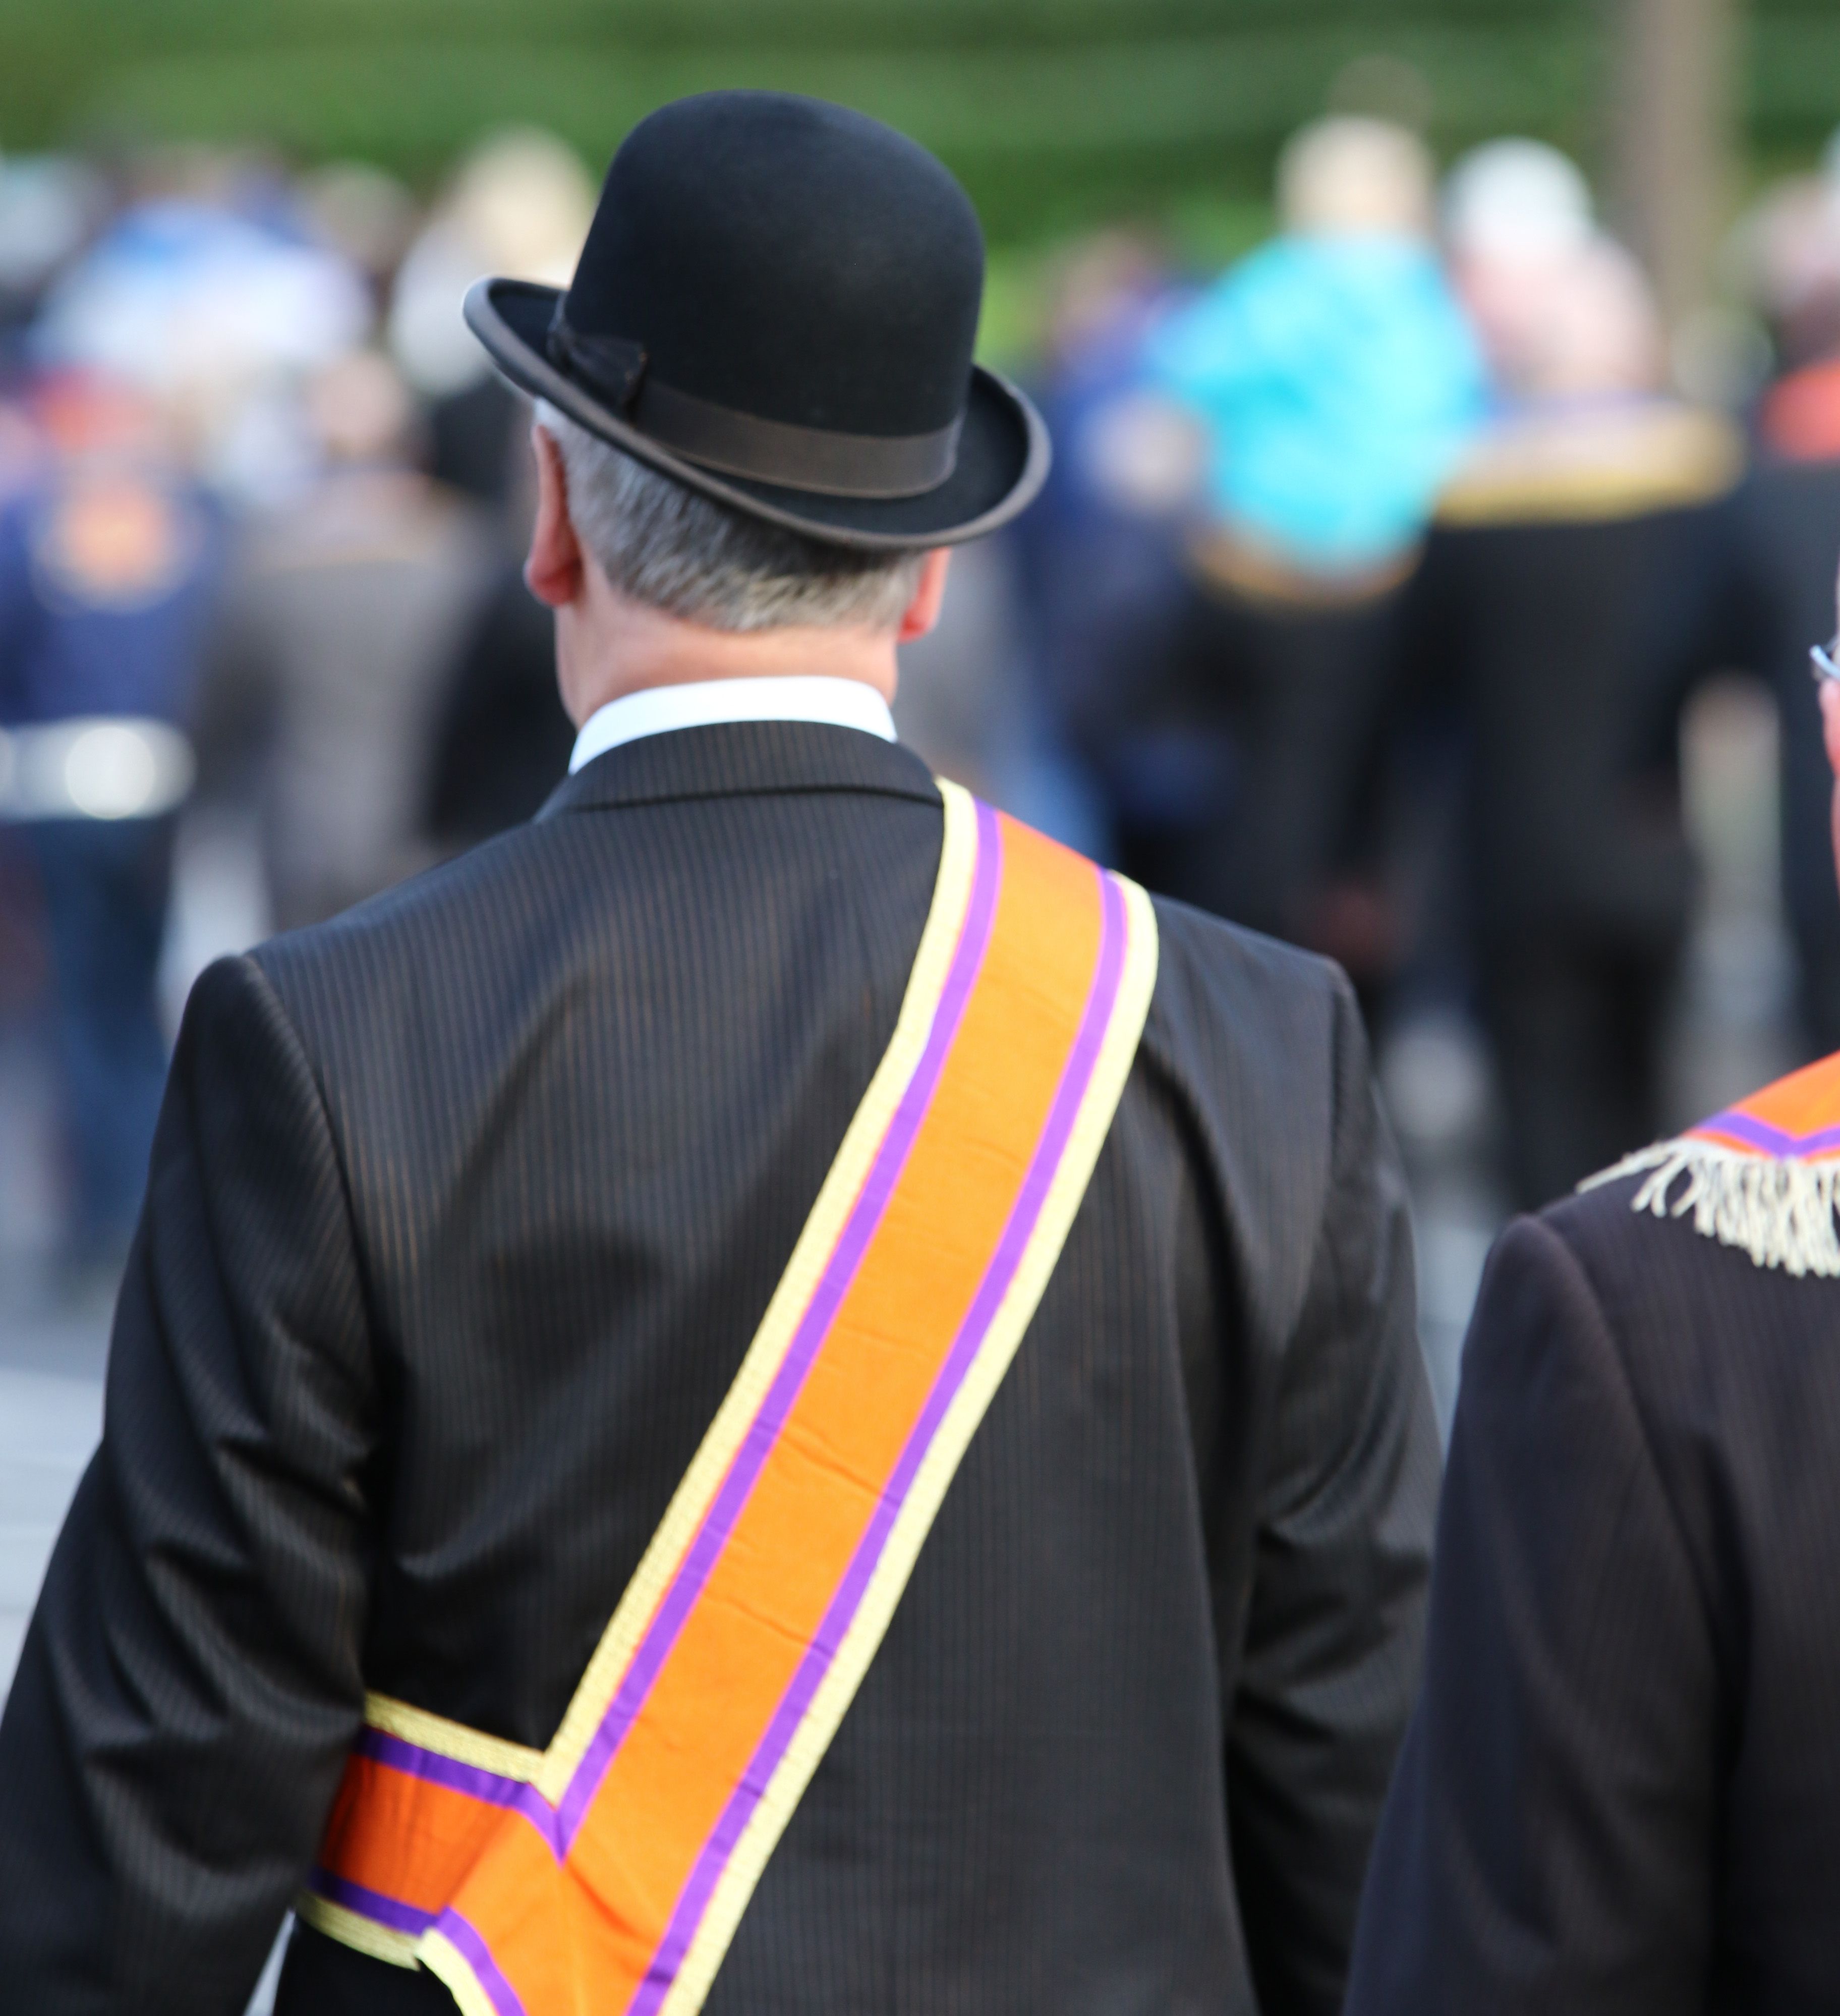 REVIEW: The Orange Order are considering major changes to its Twelfth of July parade in Belfast